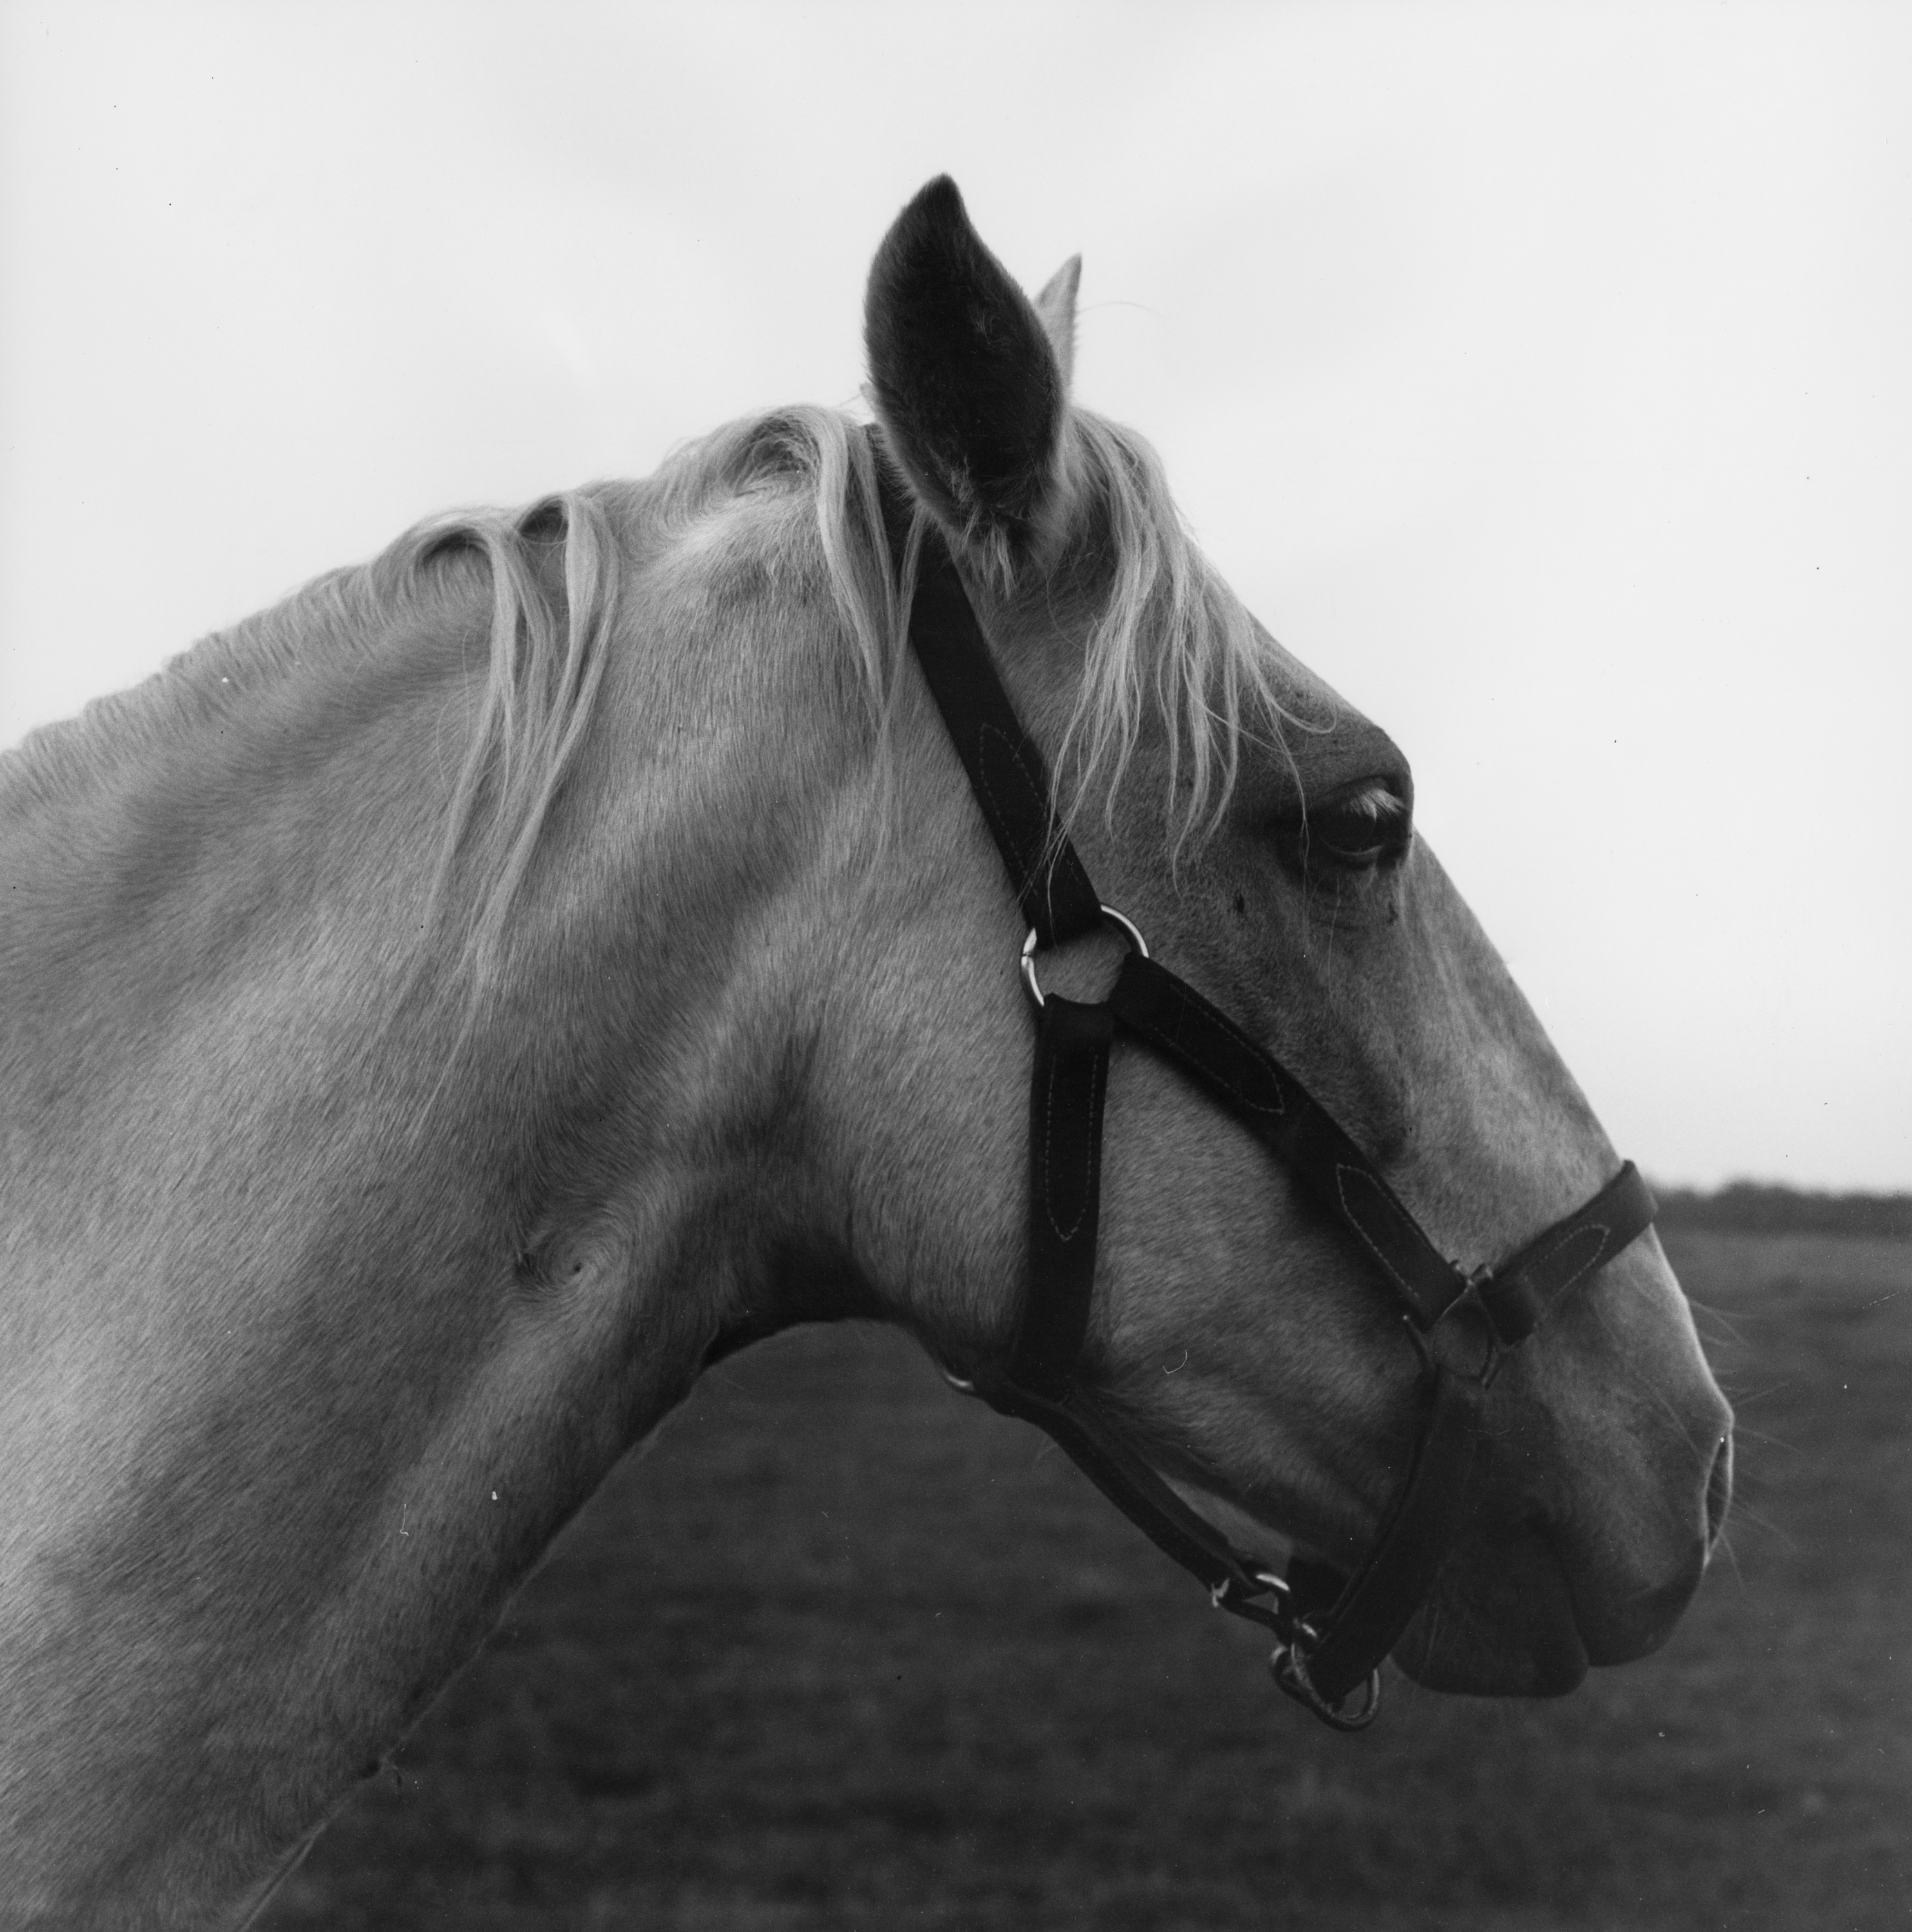 Black-and-white photograph of a palomino horse's head in profile